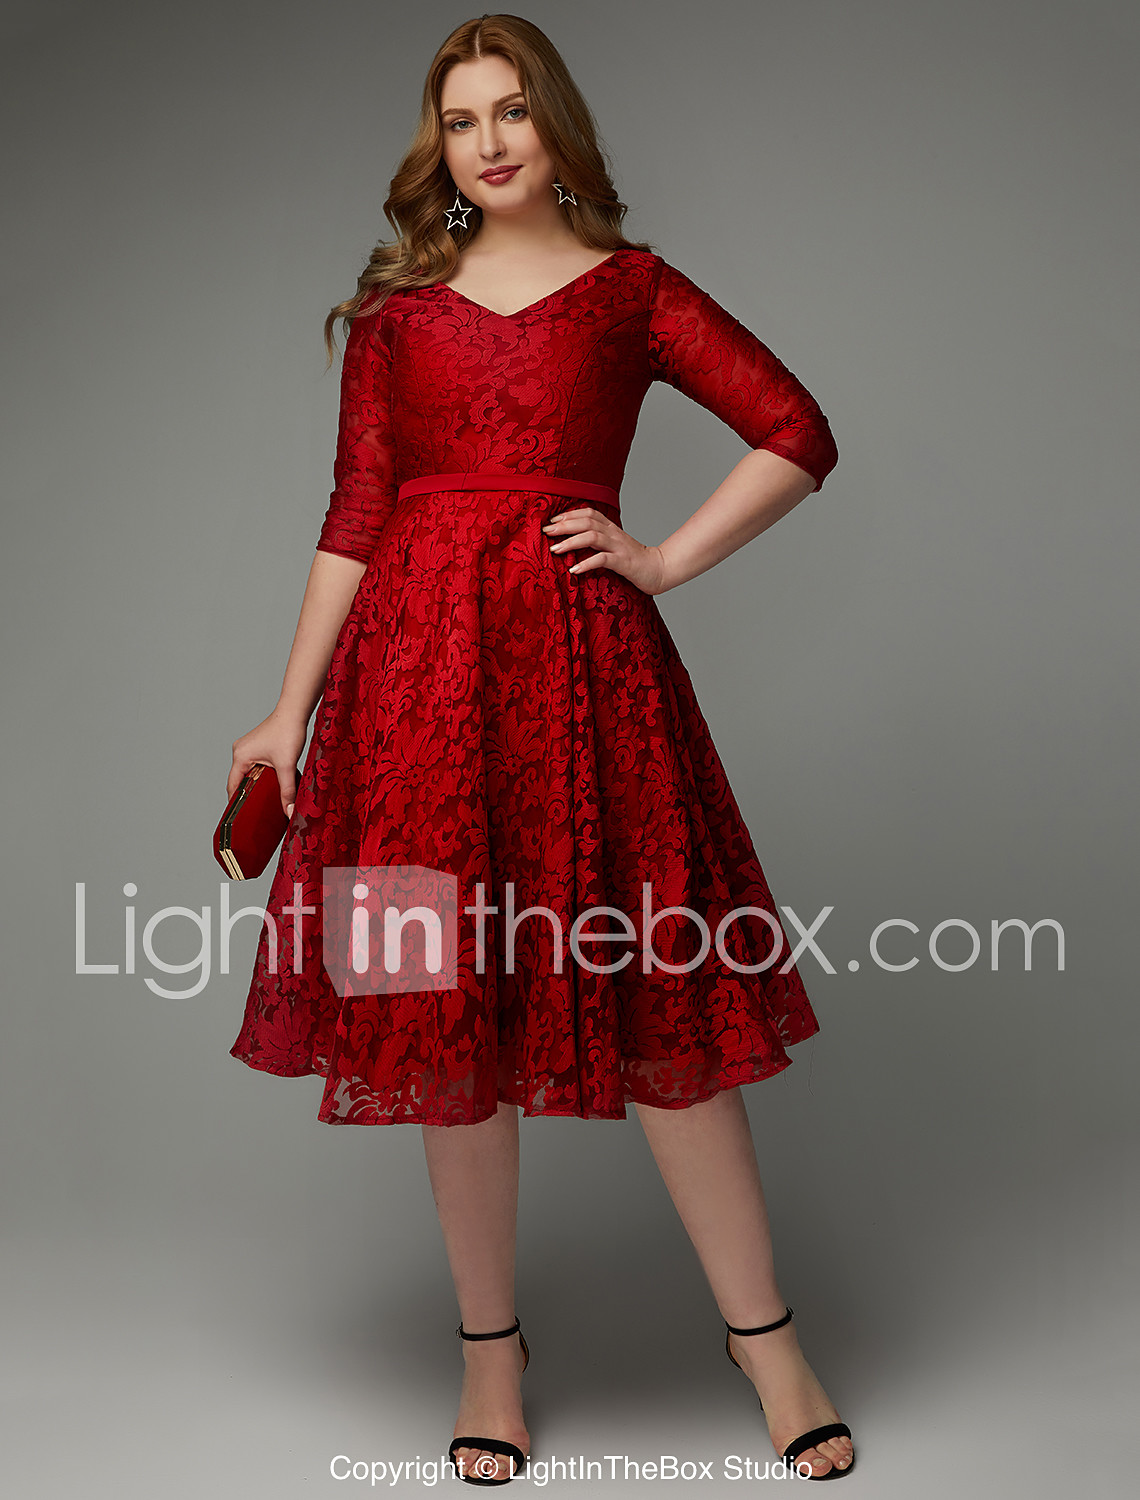 A Line Elegant Cocktail Party Valentine S Day Dress V Neck 3 4 Length Sleeve Knee Length Lace With Sash Ribbon 21 21 119 99